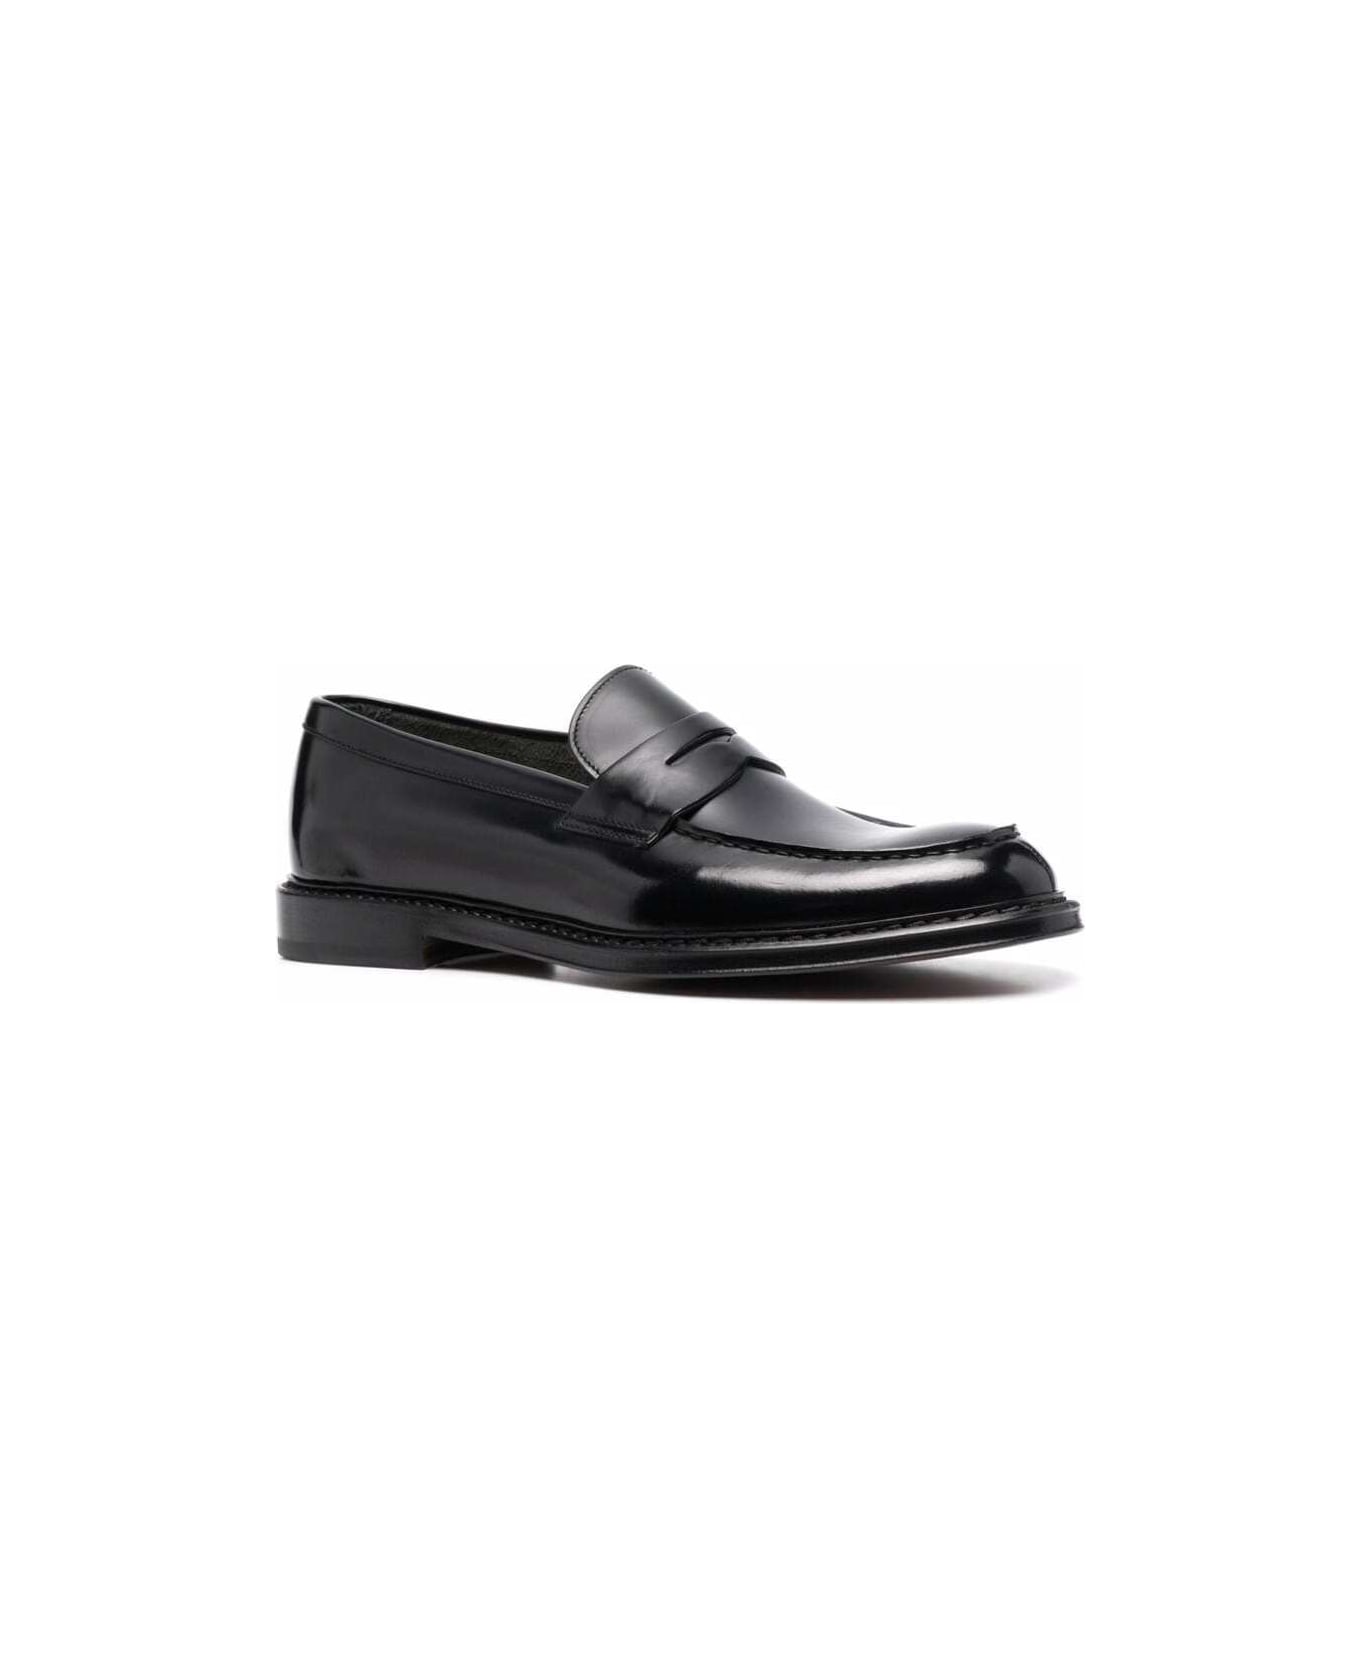 Doucal's Black Slip-on Loafers With Round Toe In Patent Leather Man - Black